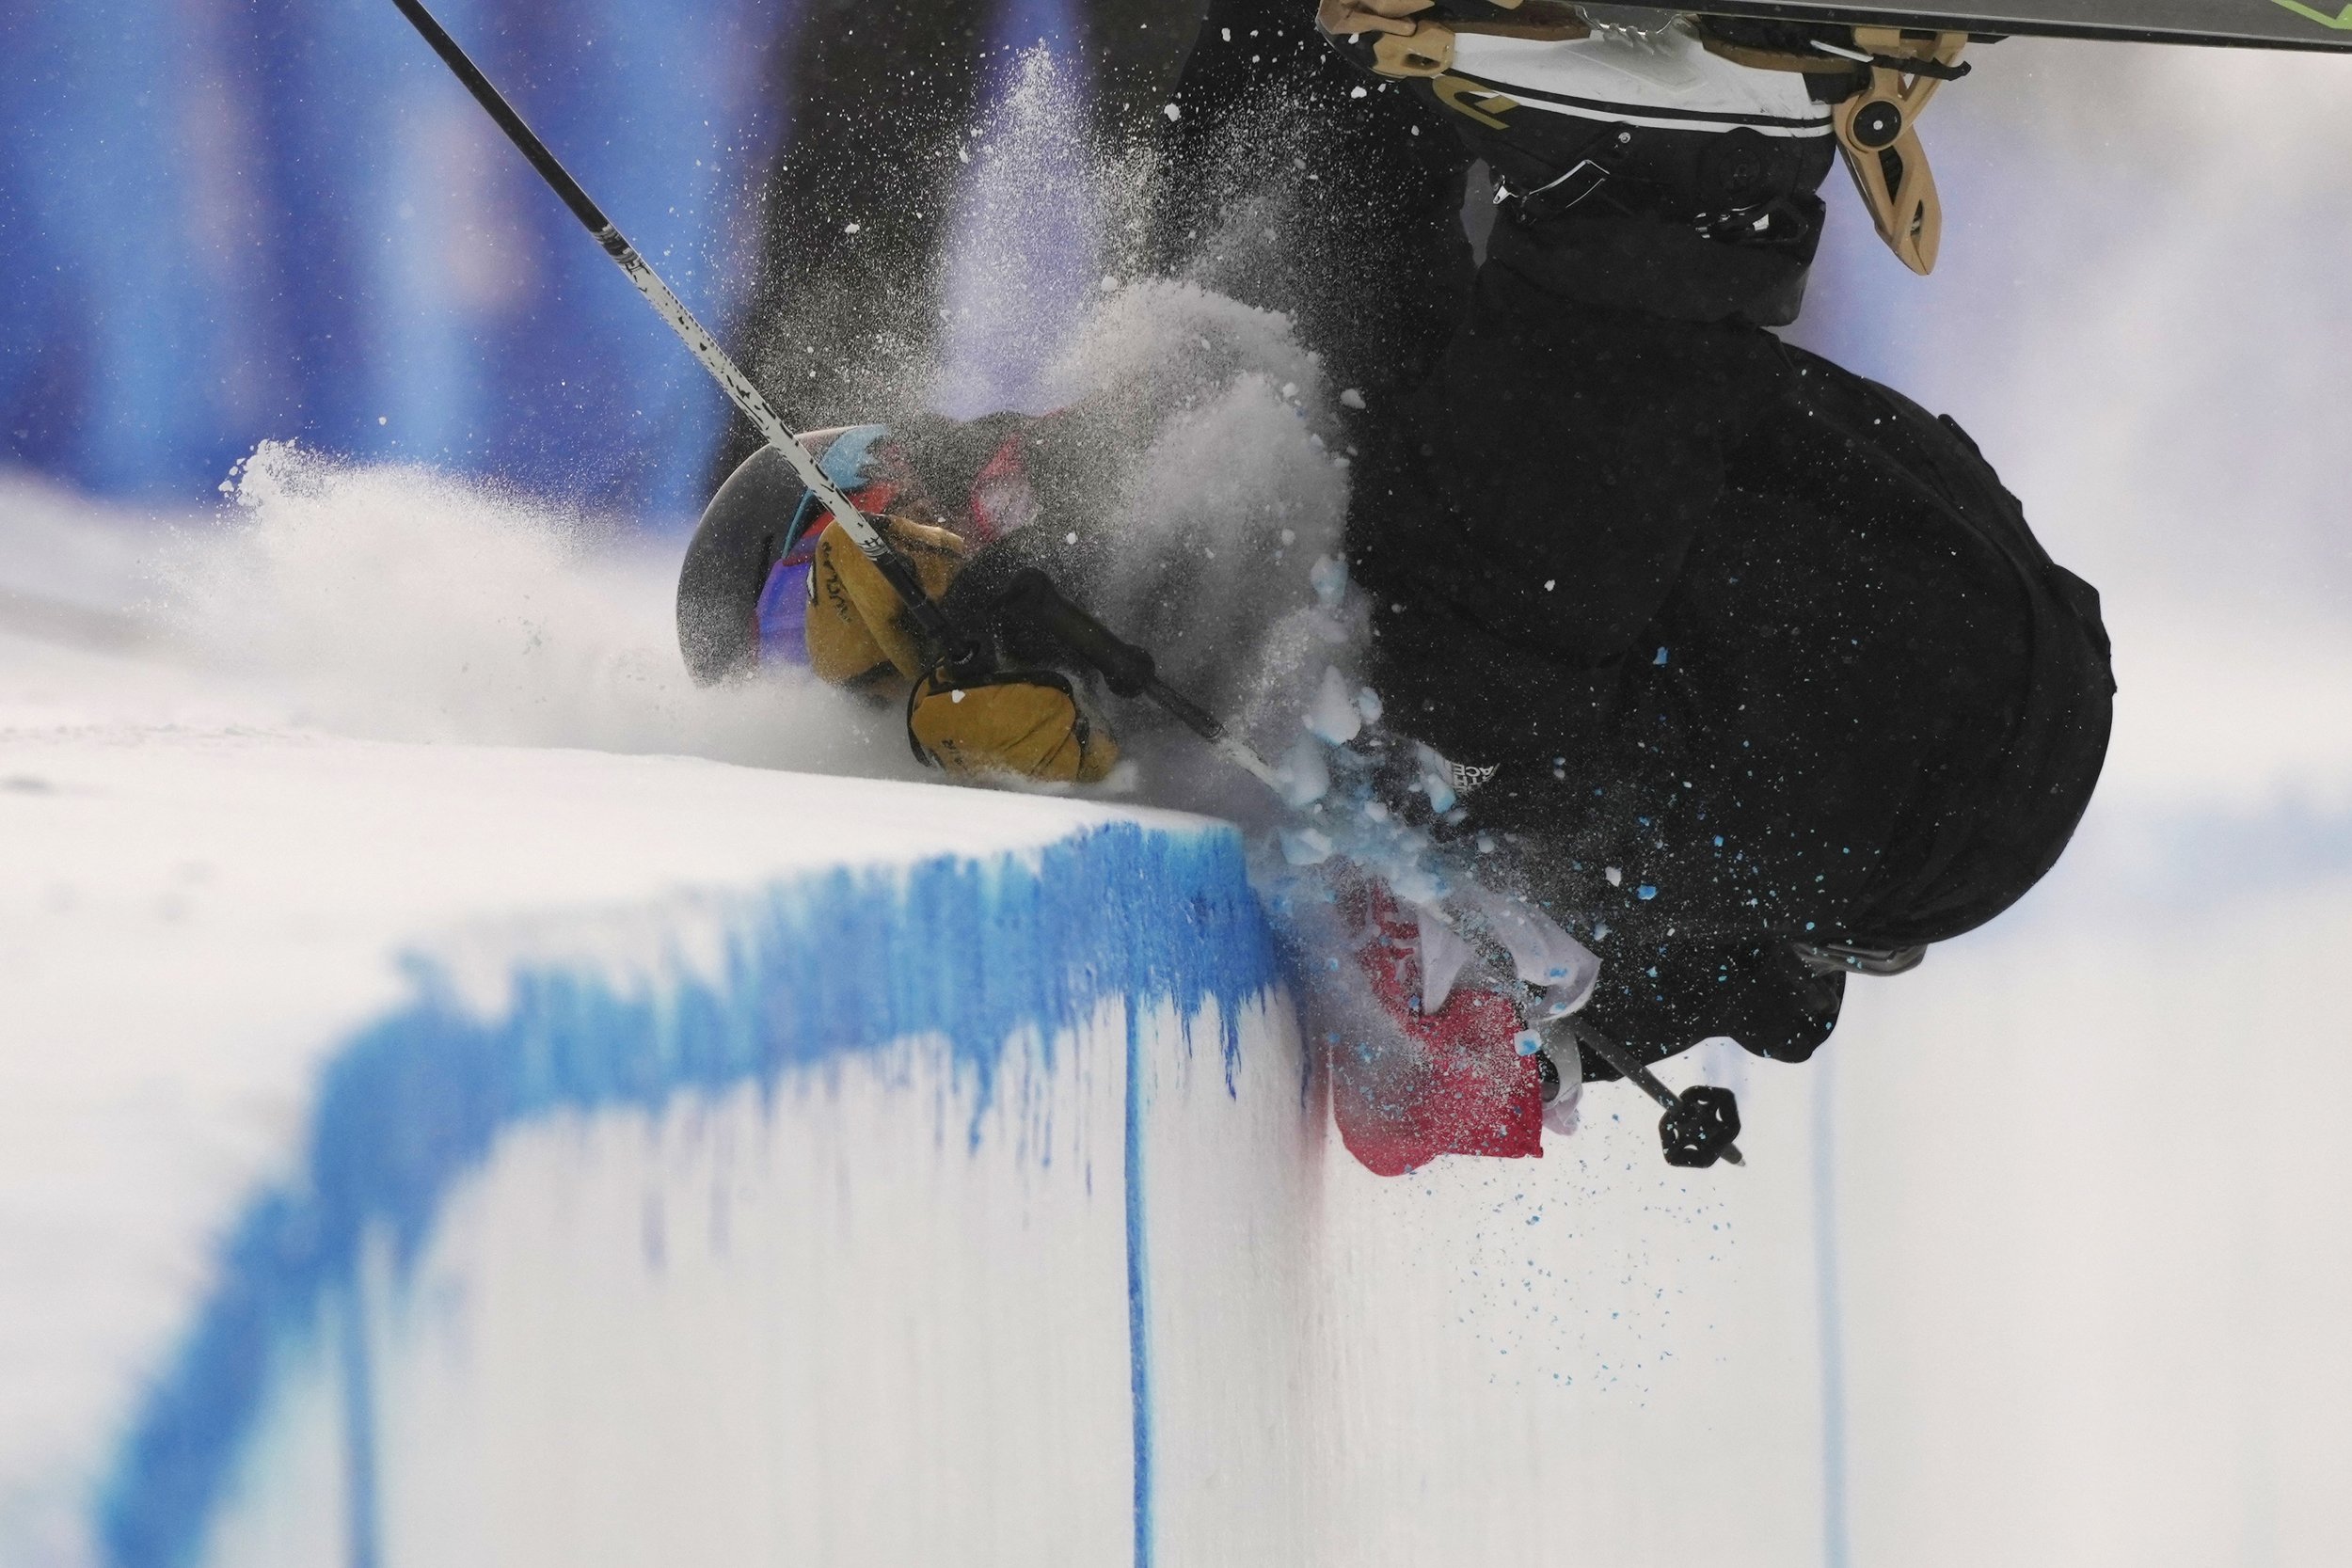  New Zealand's Ben Harrington crashes into the edge of the course during the men's halfpipe qualification at the 2022 Winter Olympics, Thursday, Feb. 17, 2022, in Zhangjiakou, China. (AP Photo/Francisco Seco) 